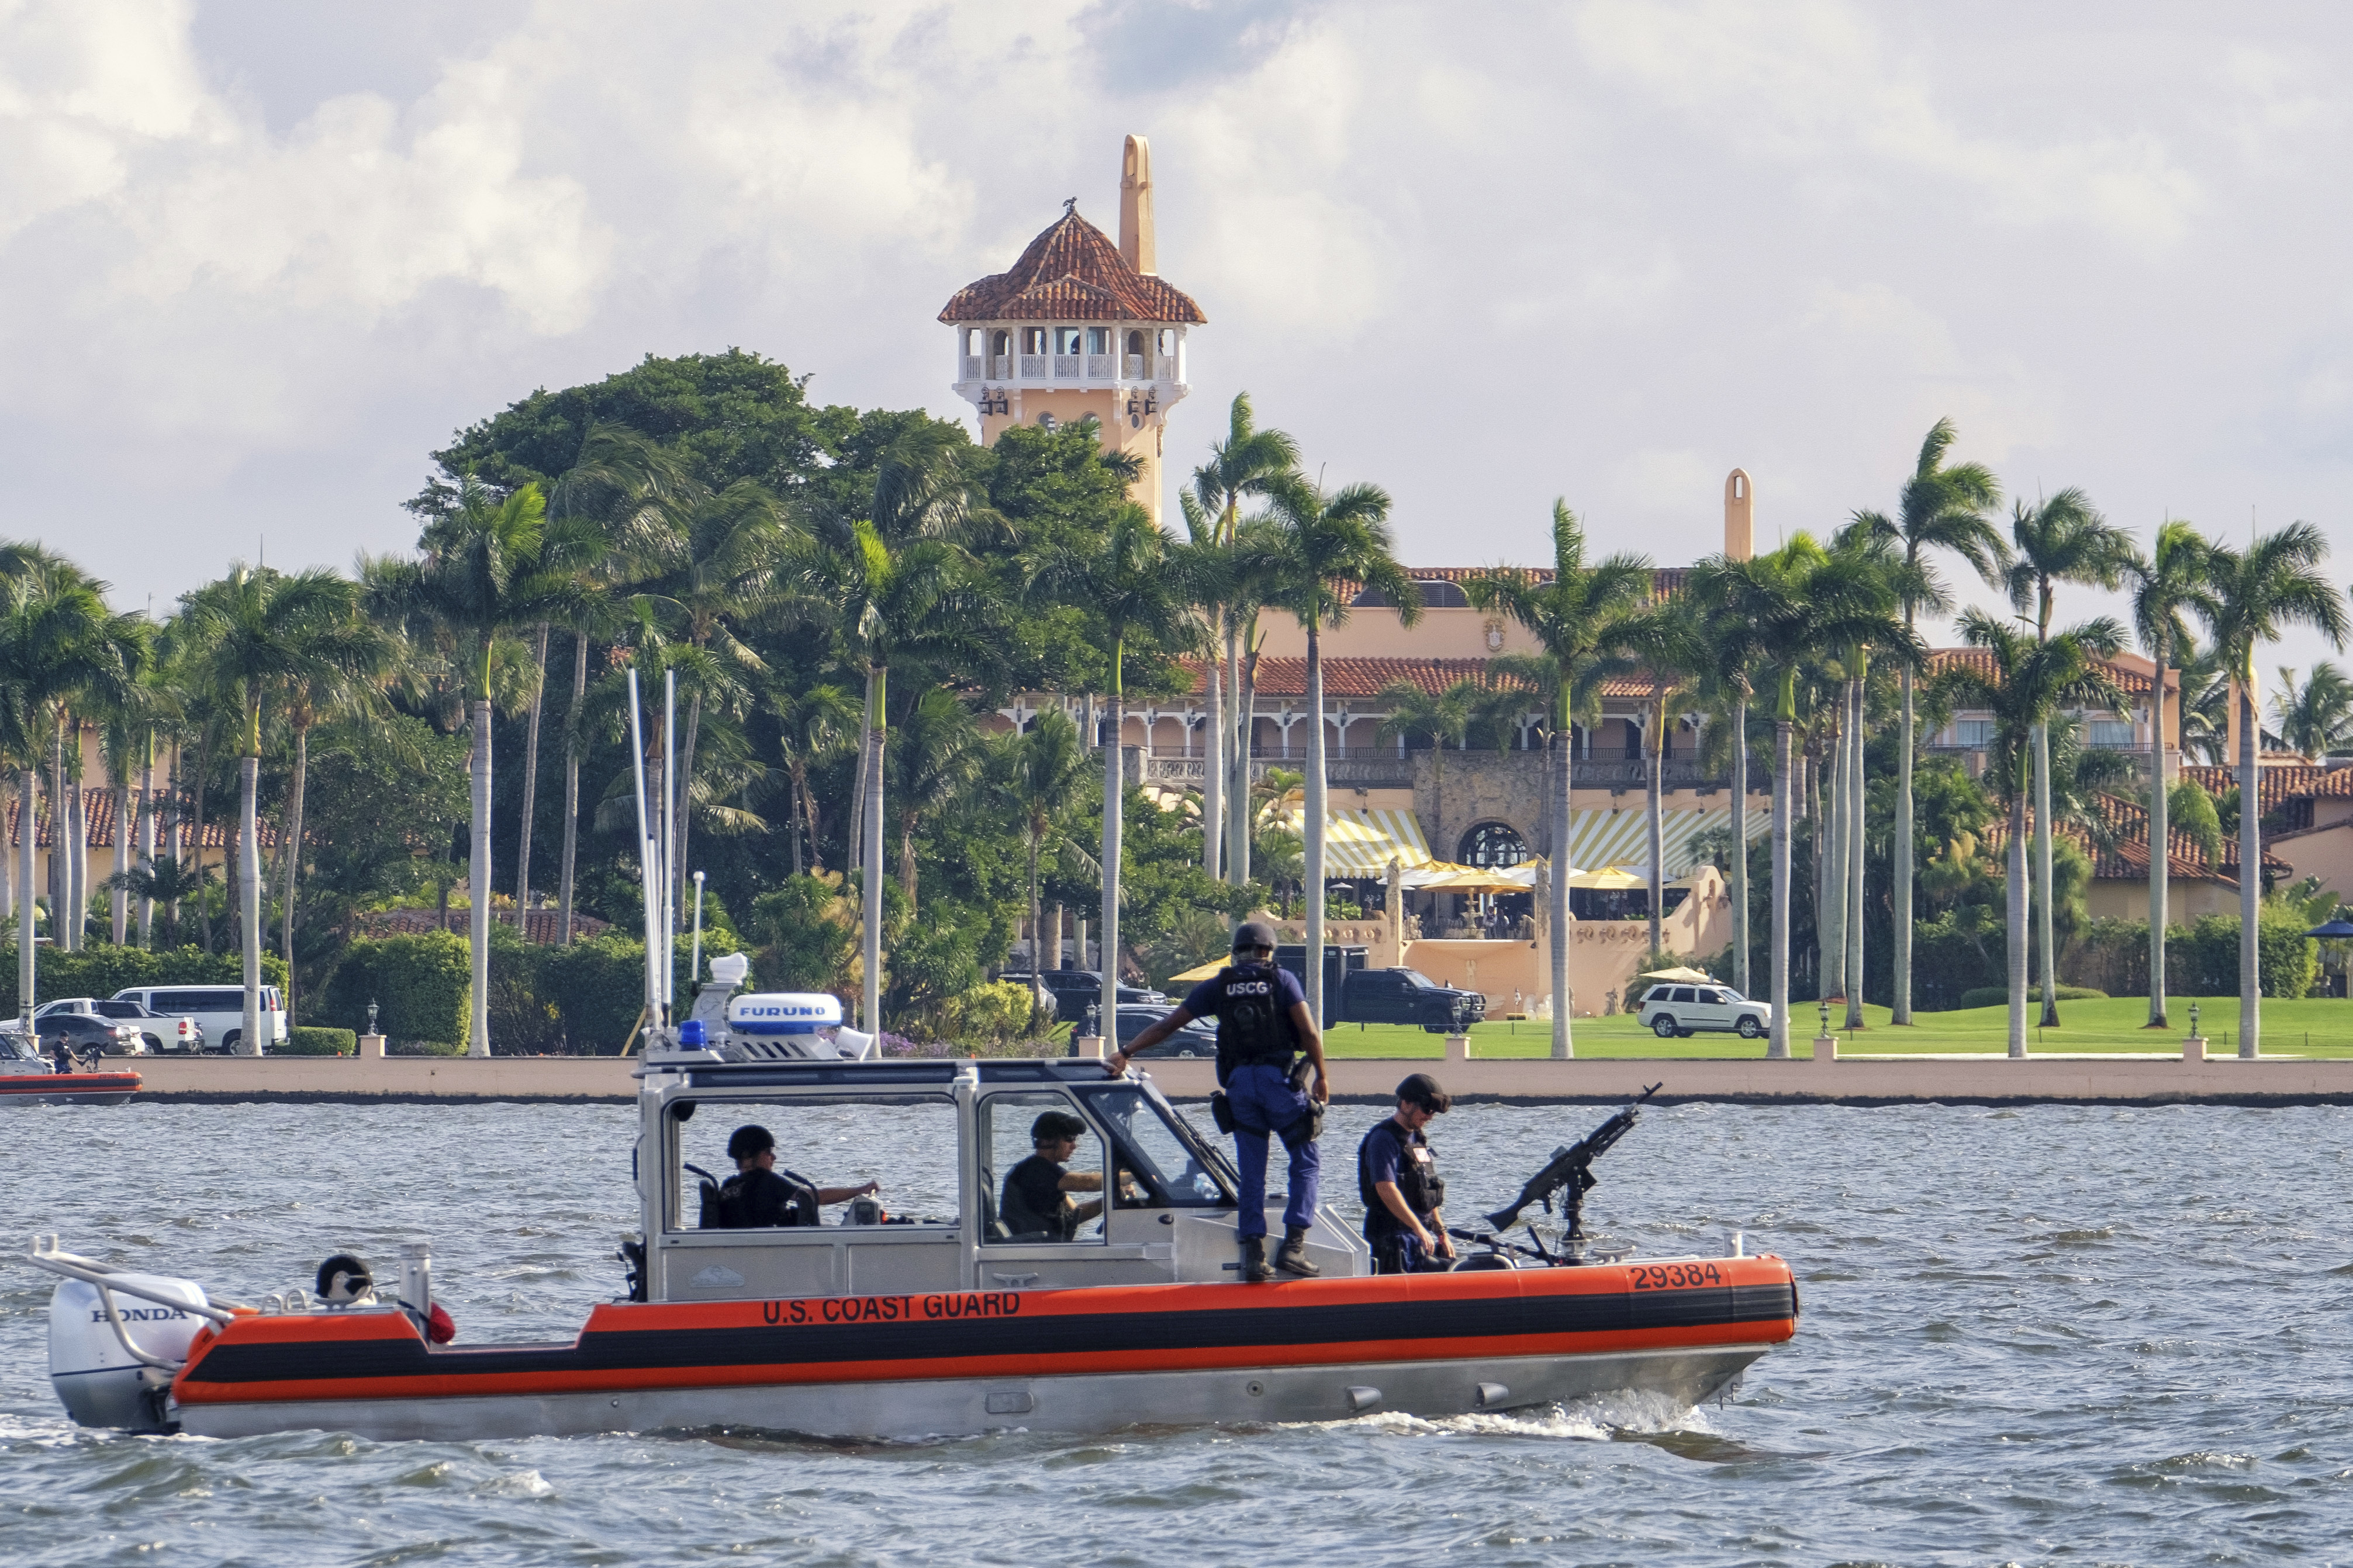 Trump S Move To Mar A Lago In Florida Challenged By Neighbor